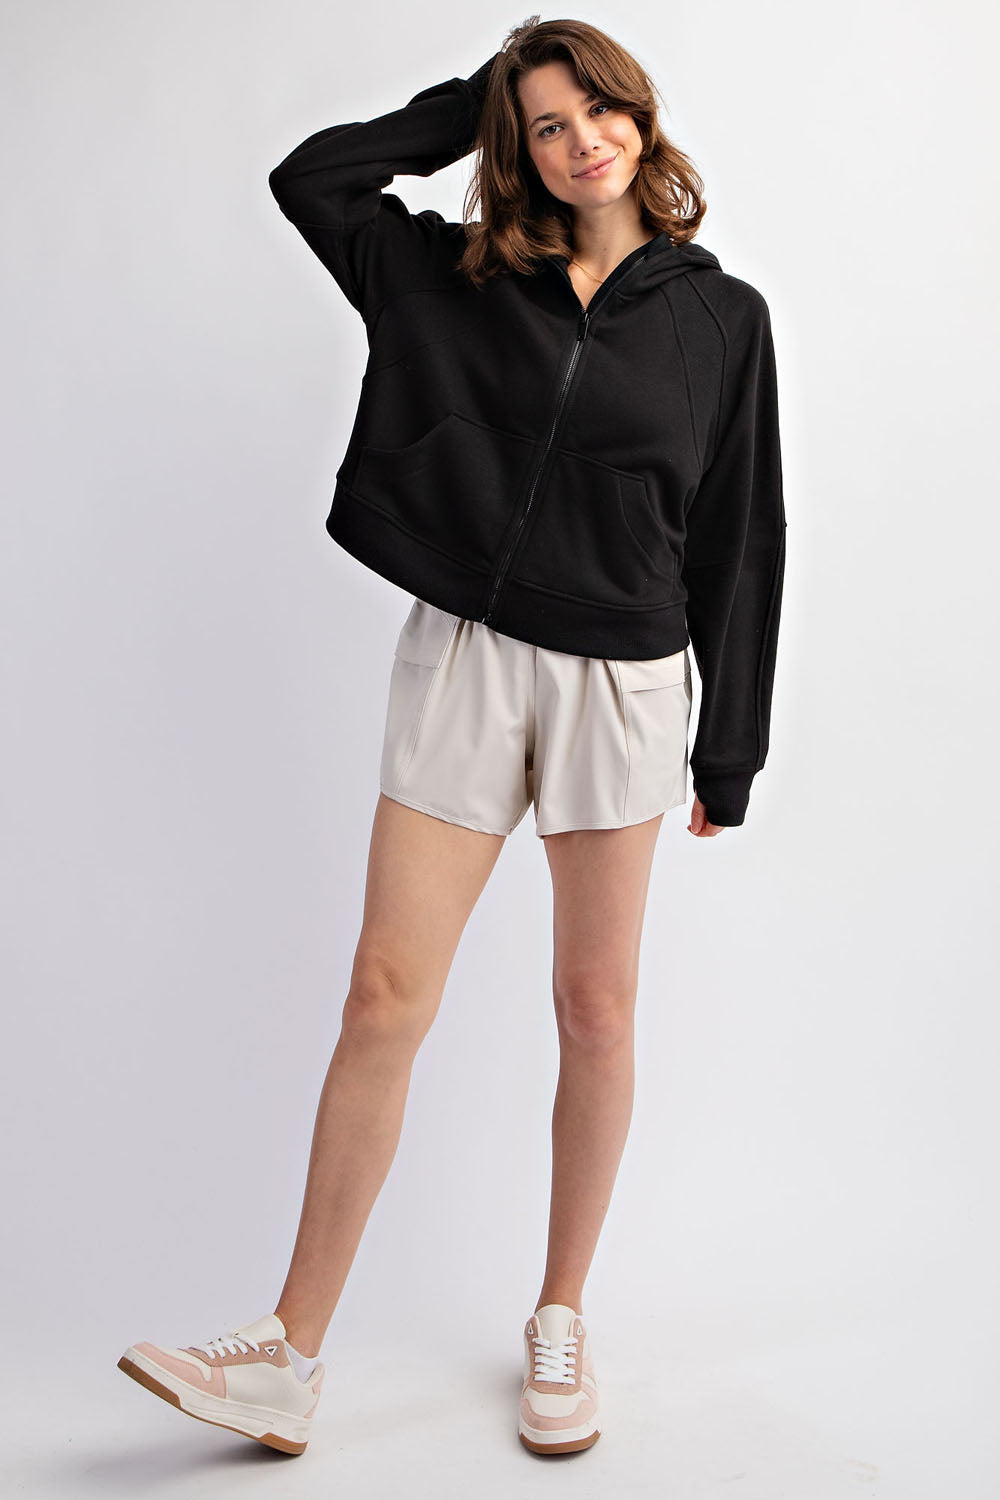 French Terry Crop Zip up